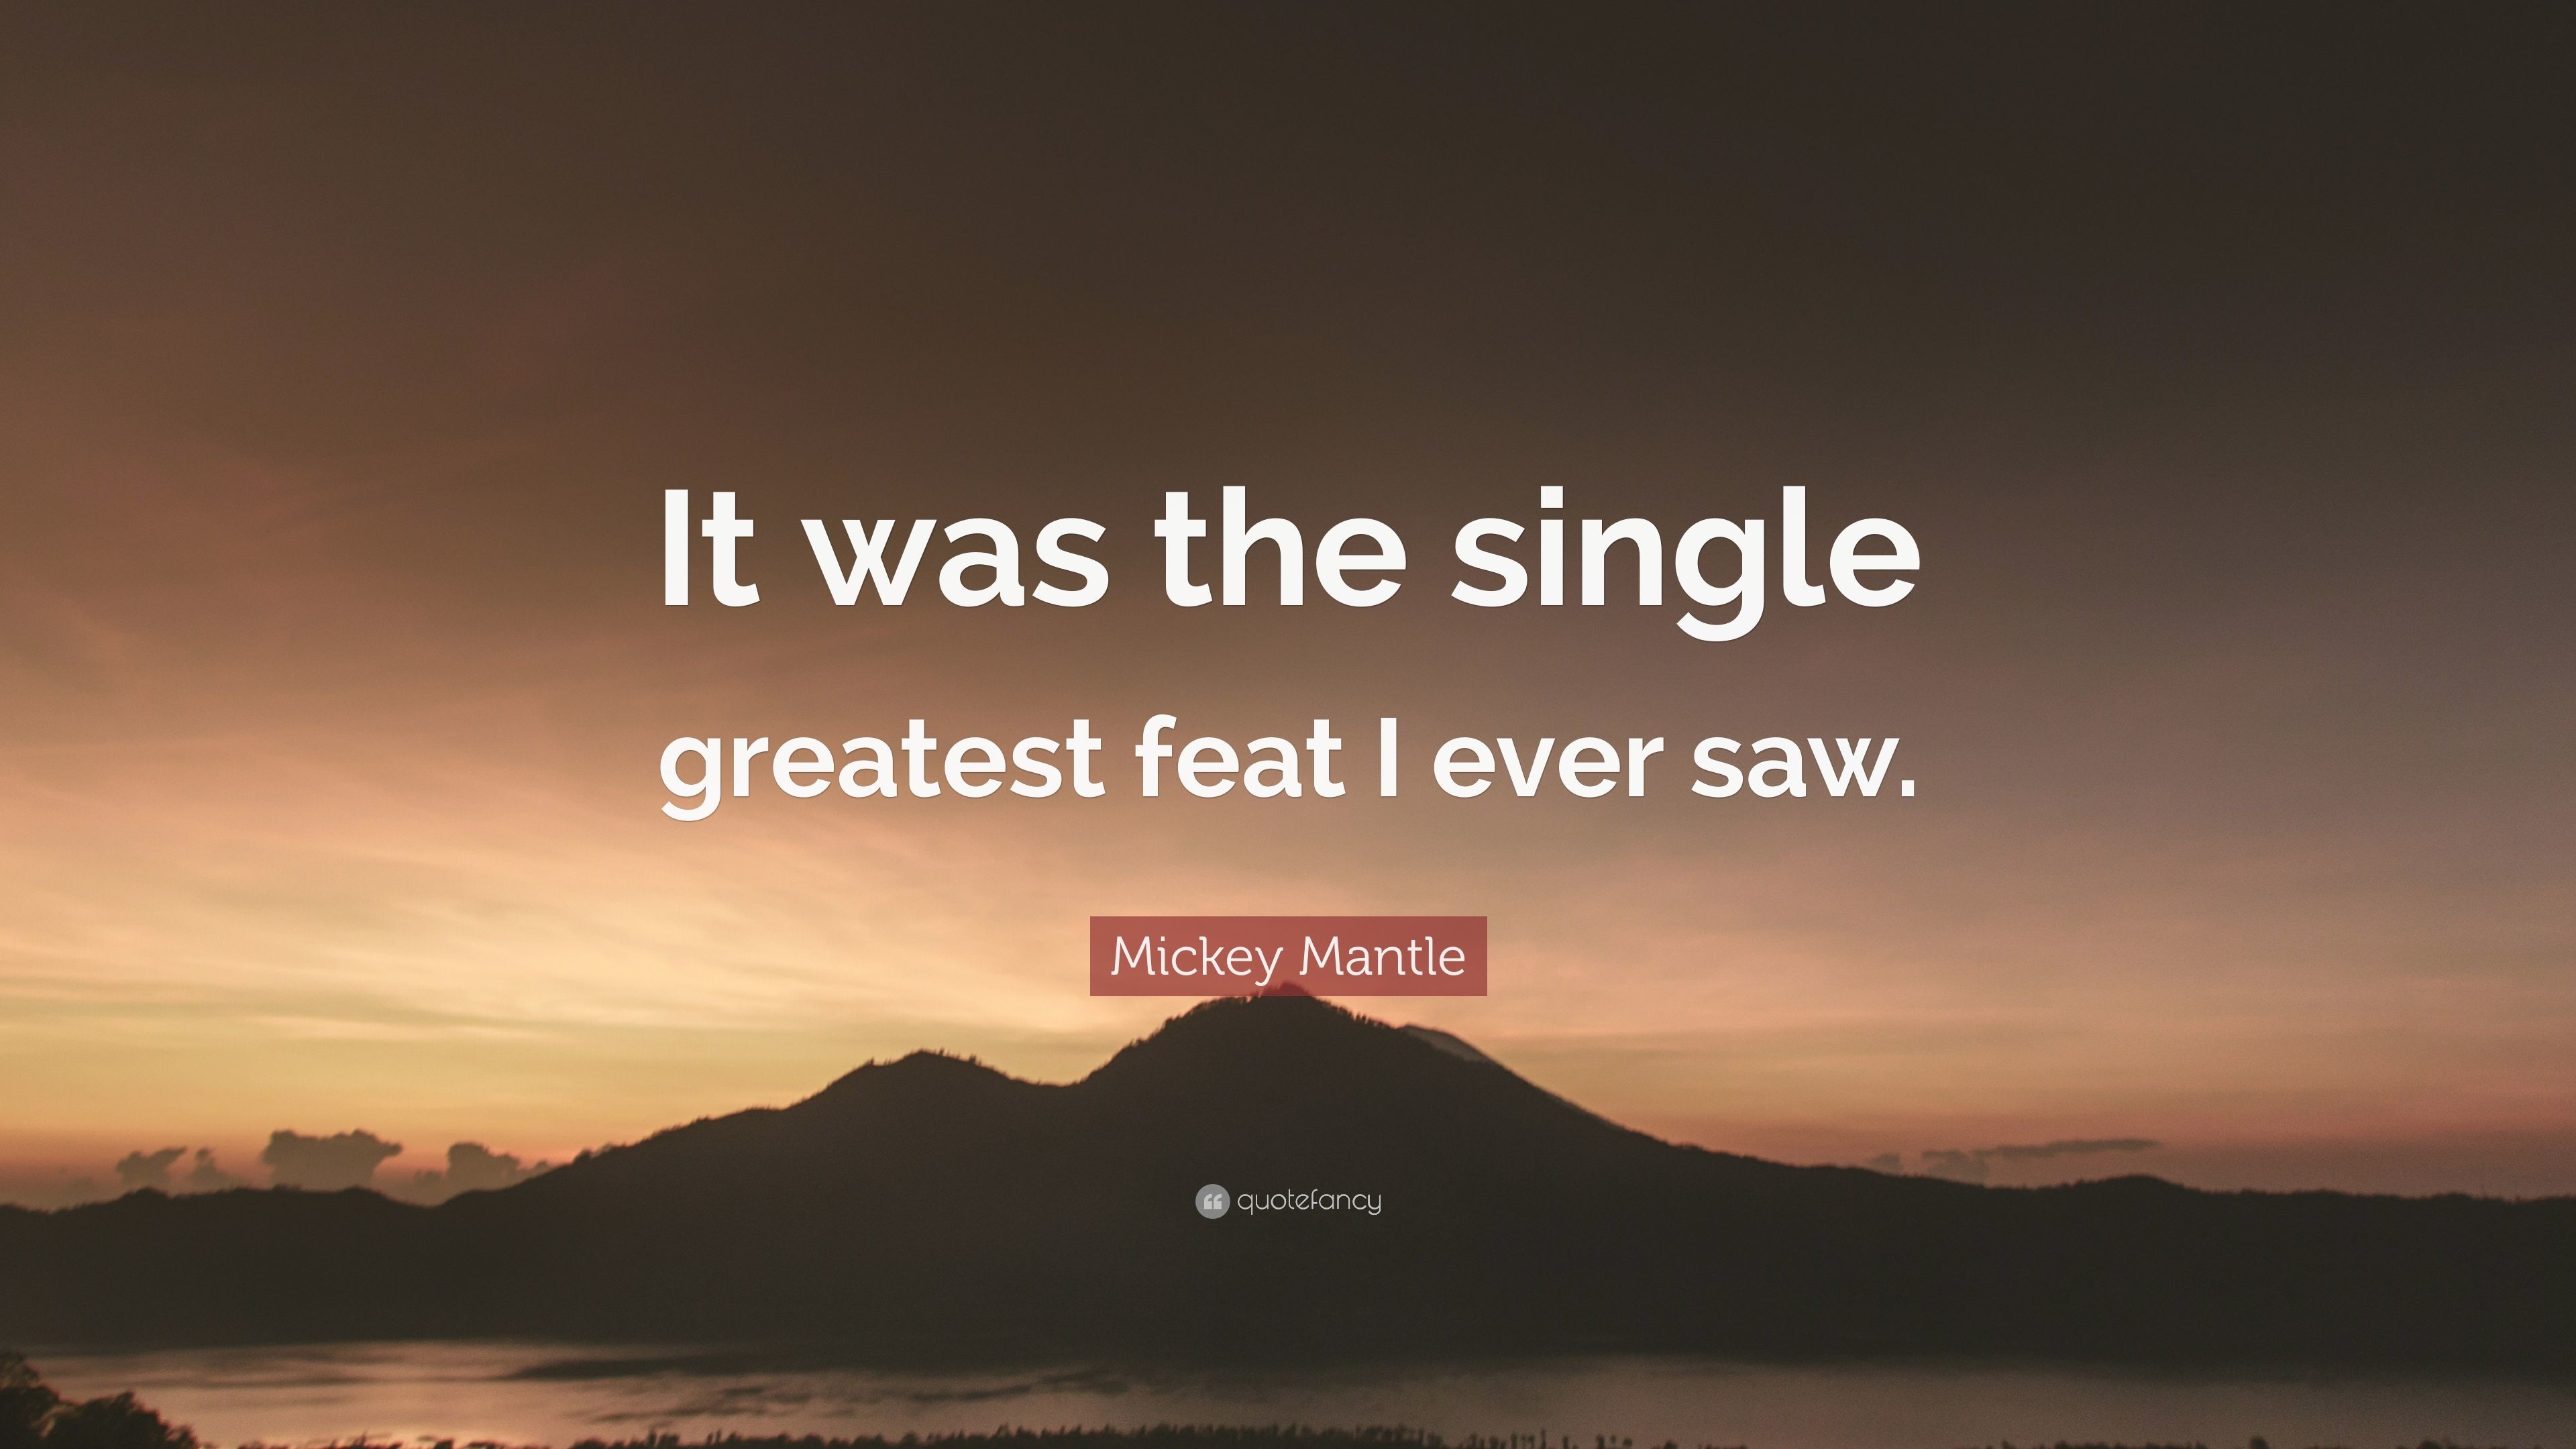 Mickey Mantle Quote: “It was the single greatest feat I ever saw.”